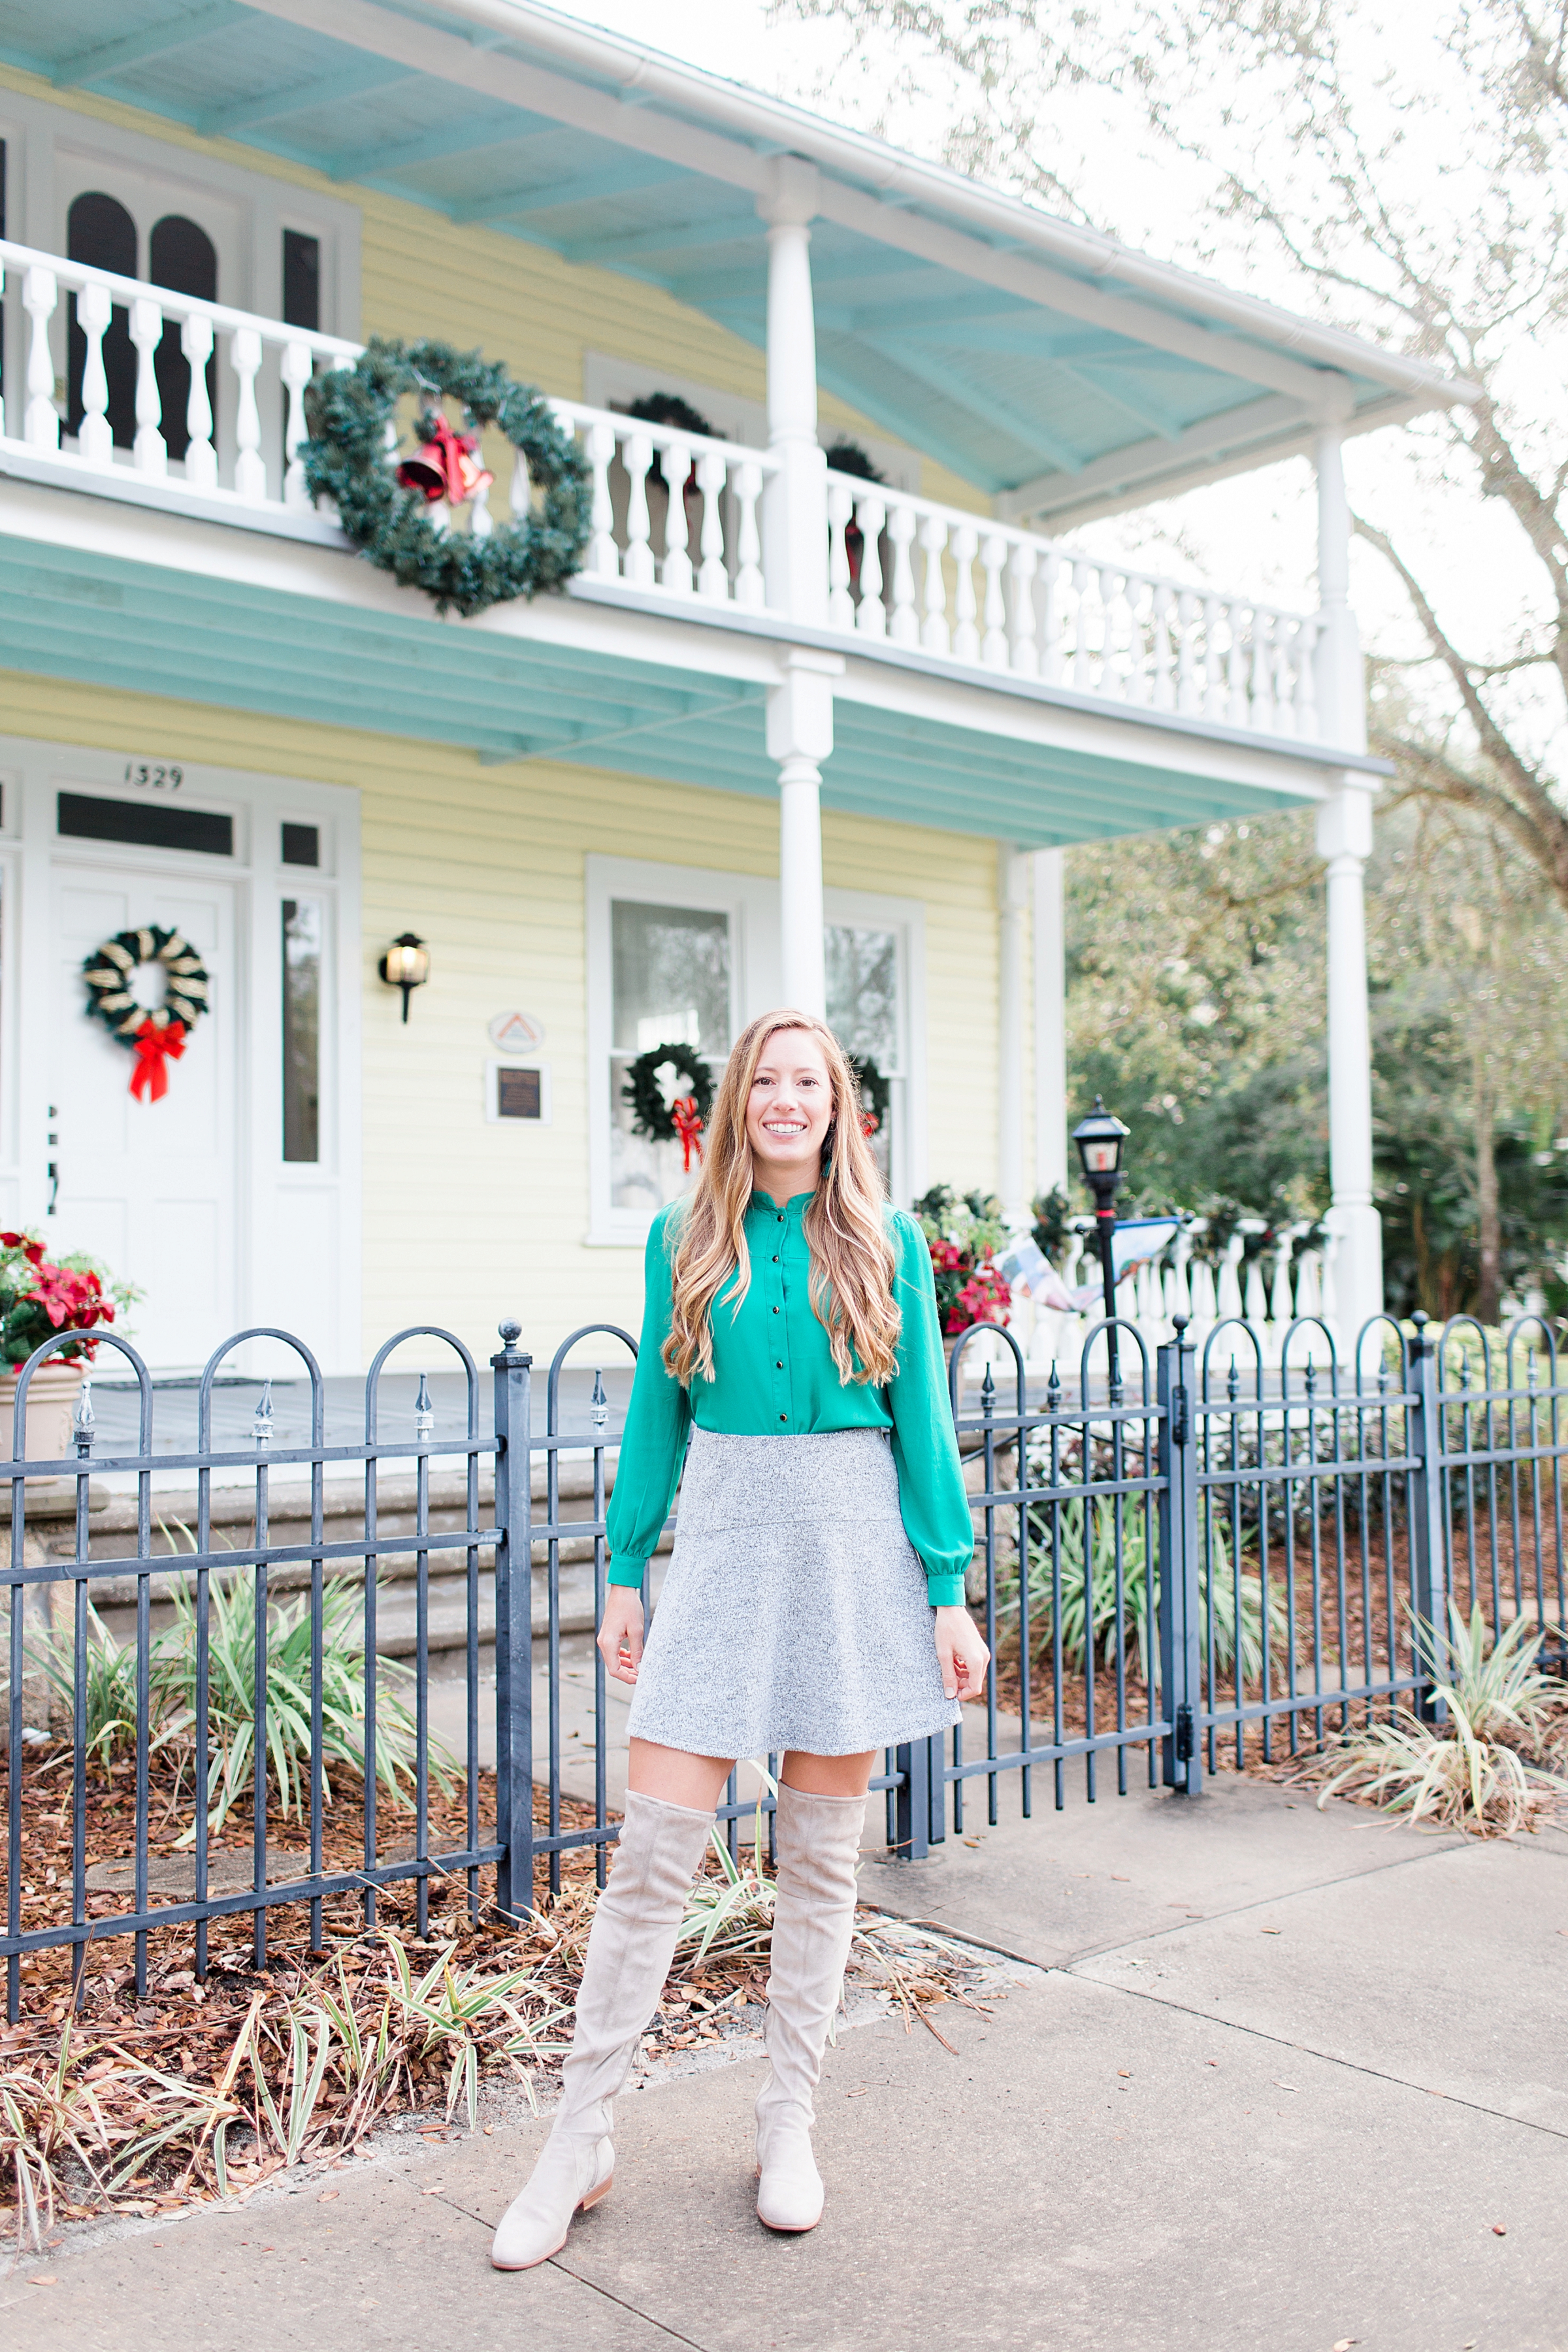 Festive Christmas Party Outfit // What to Wear for a Christmas Party // Christmas Day Outfit // Green Blouse // Grey Over the Knee Boots // LOFT Swing Skirt - More on www.thesunshinestyle.com